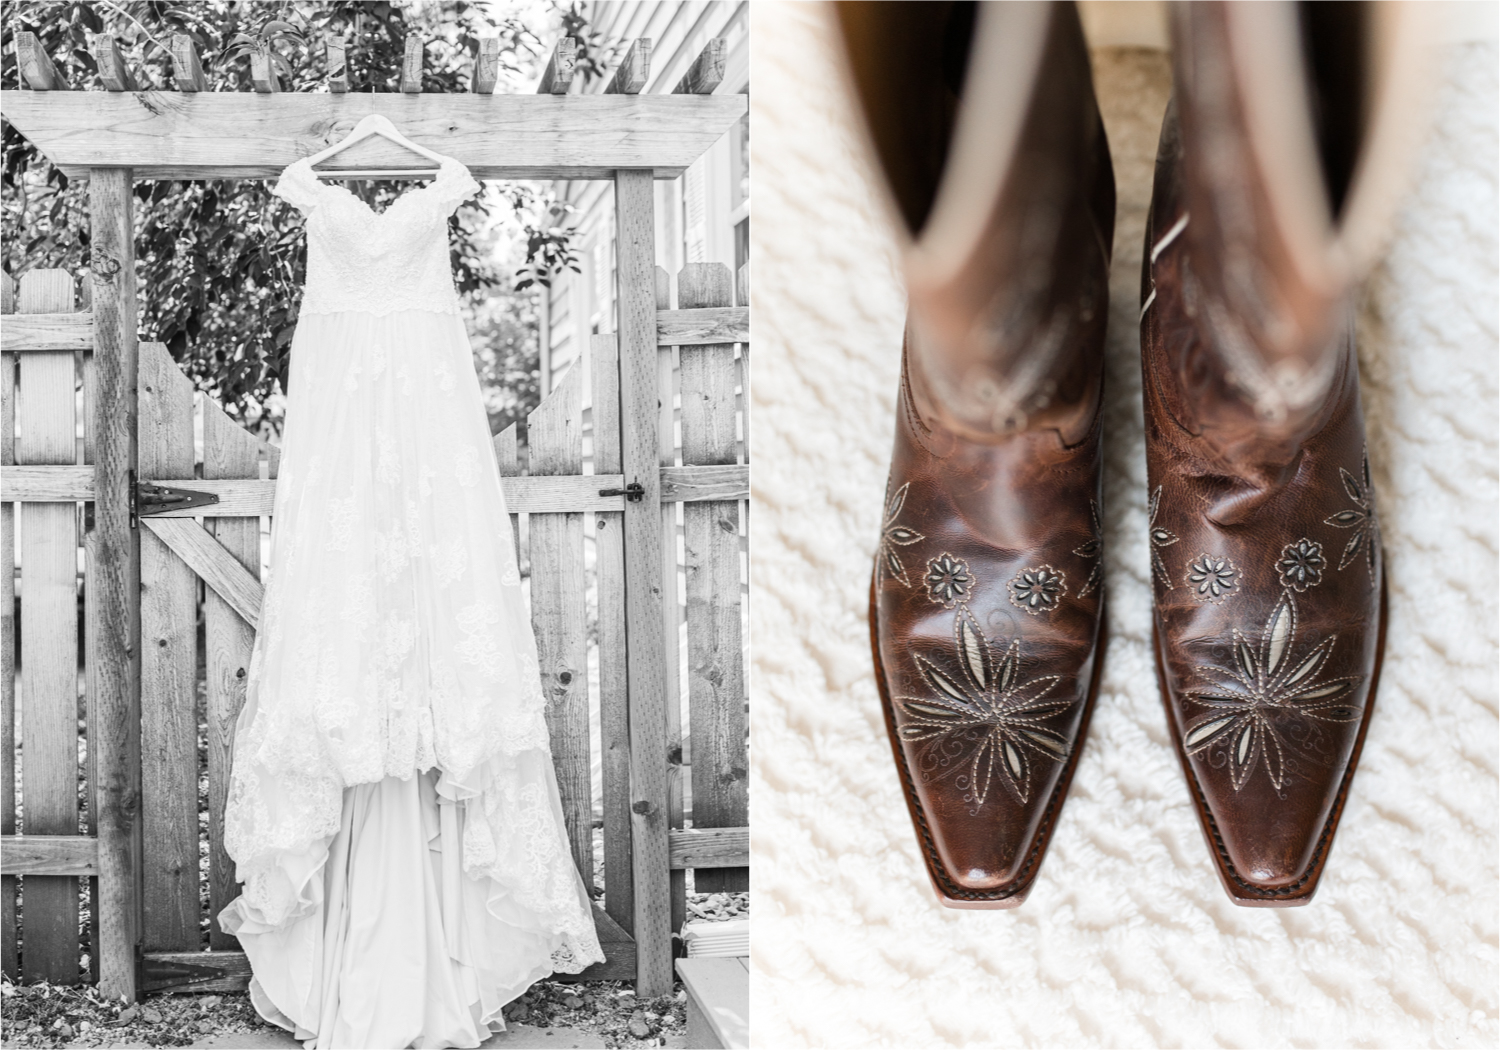 Summer Ellis Ranch Wedding in Loveland Colorado | Britni Girard Photography | Wedding Photo and Video Team | Bride hair Dondi AtWow from Sola Salon in Loveland | Getting Ready at Air BnB | Brides dress and boots